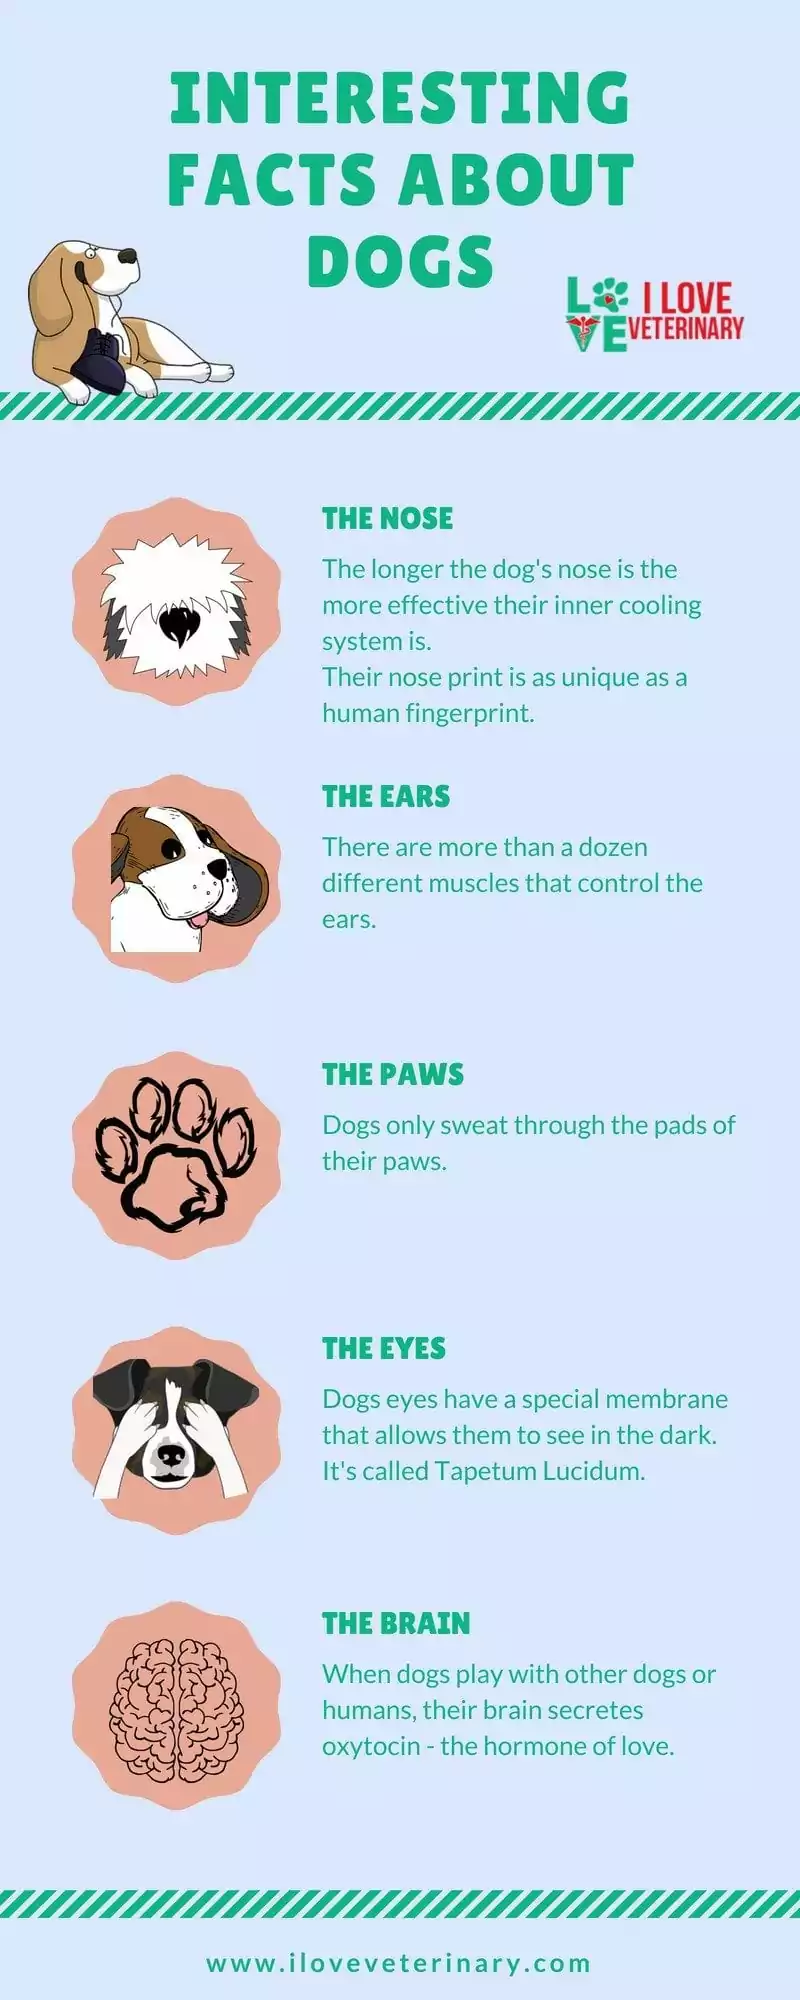 dogs infographic